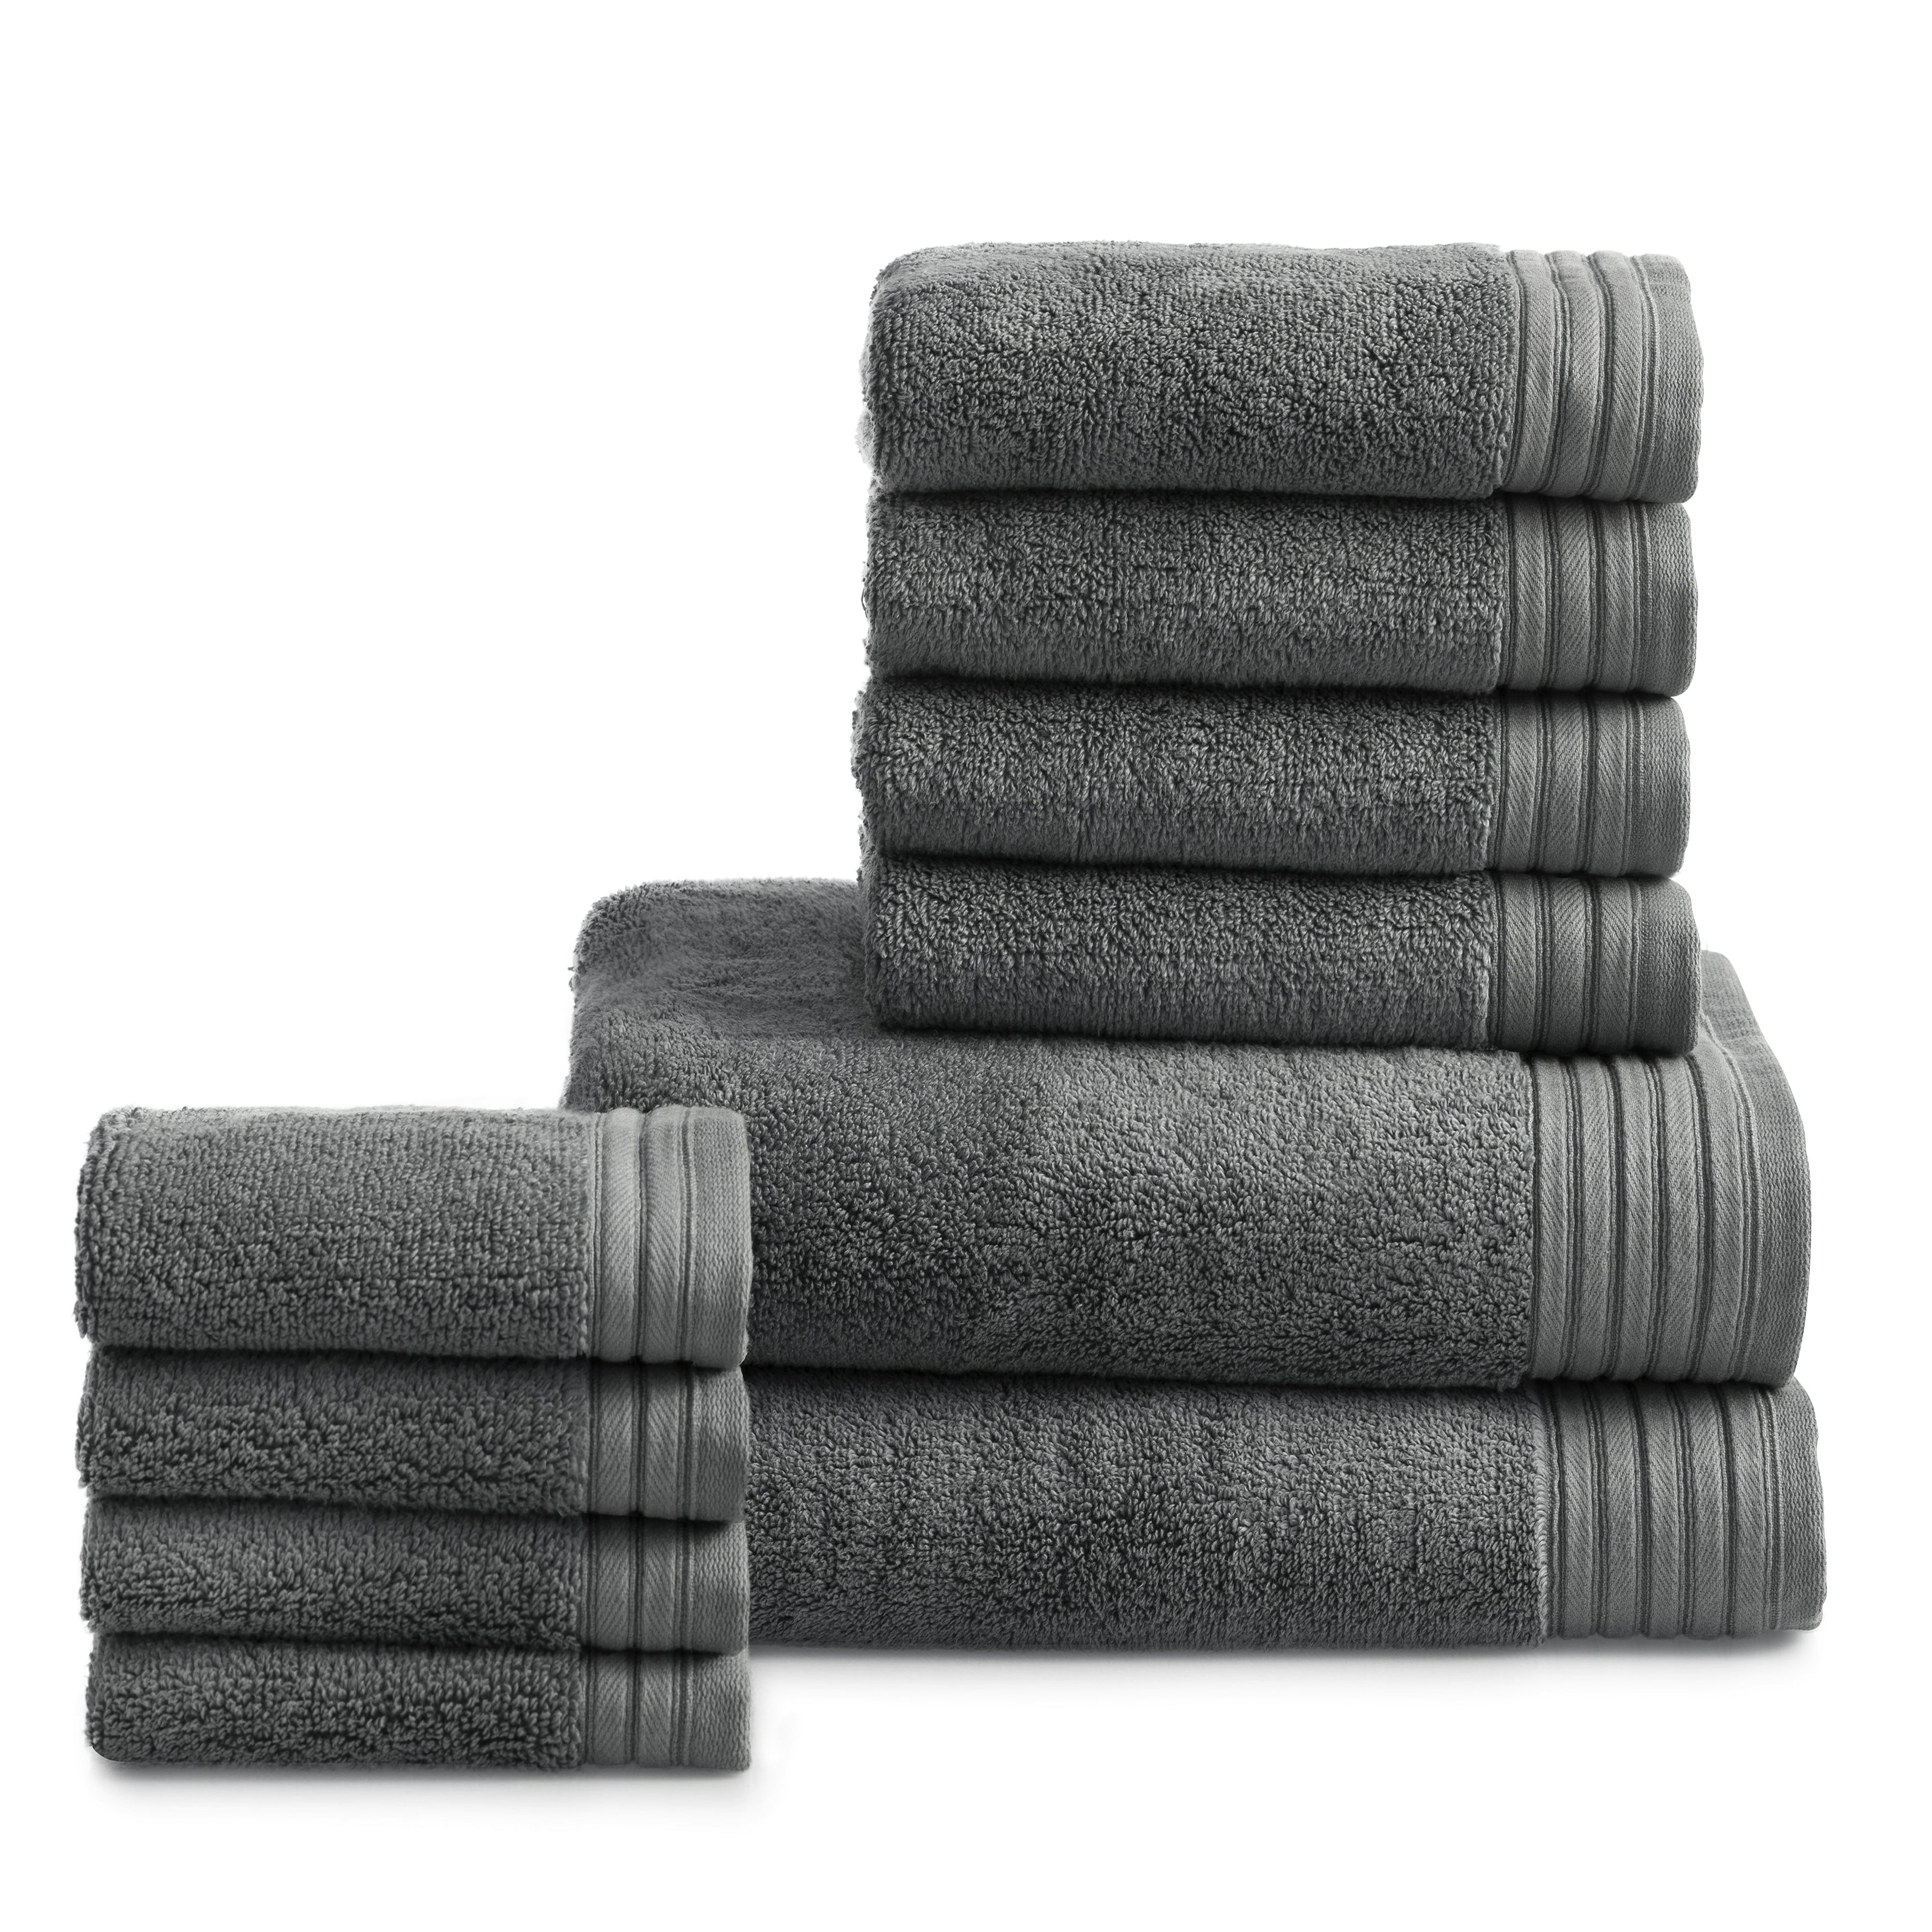 Alurri Set of 4 Luxury Hand Towels by Super Soft and Quick .. 